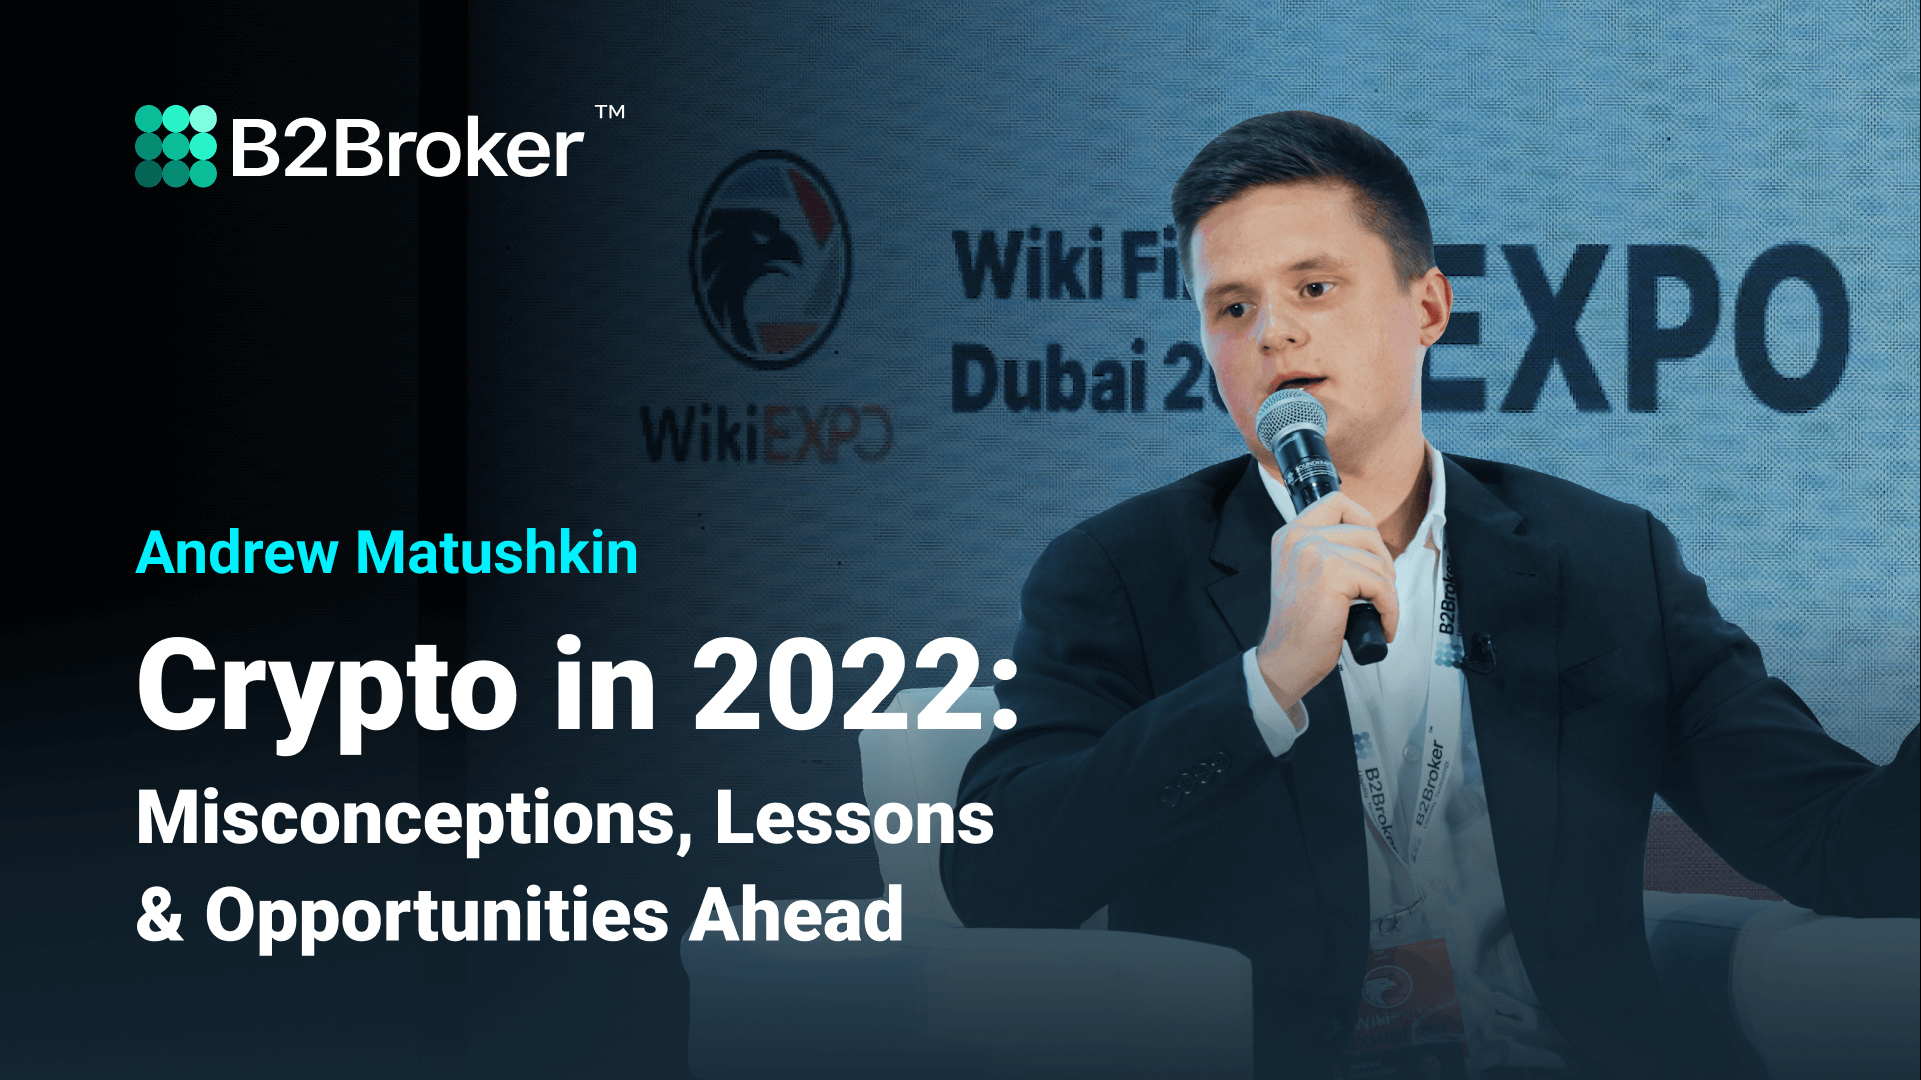 Wiki FX | Crypto in 2022: Misconceptions, Lessons & Opportunities Ahead